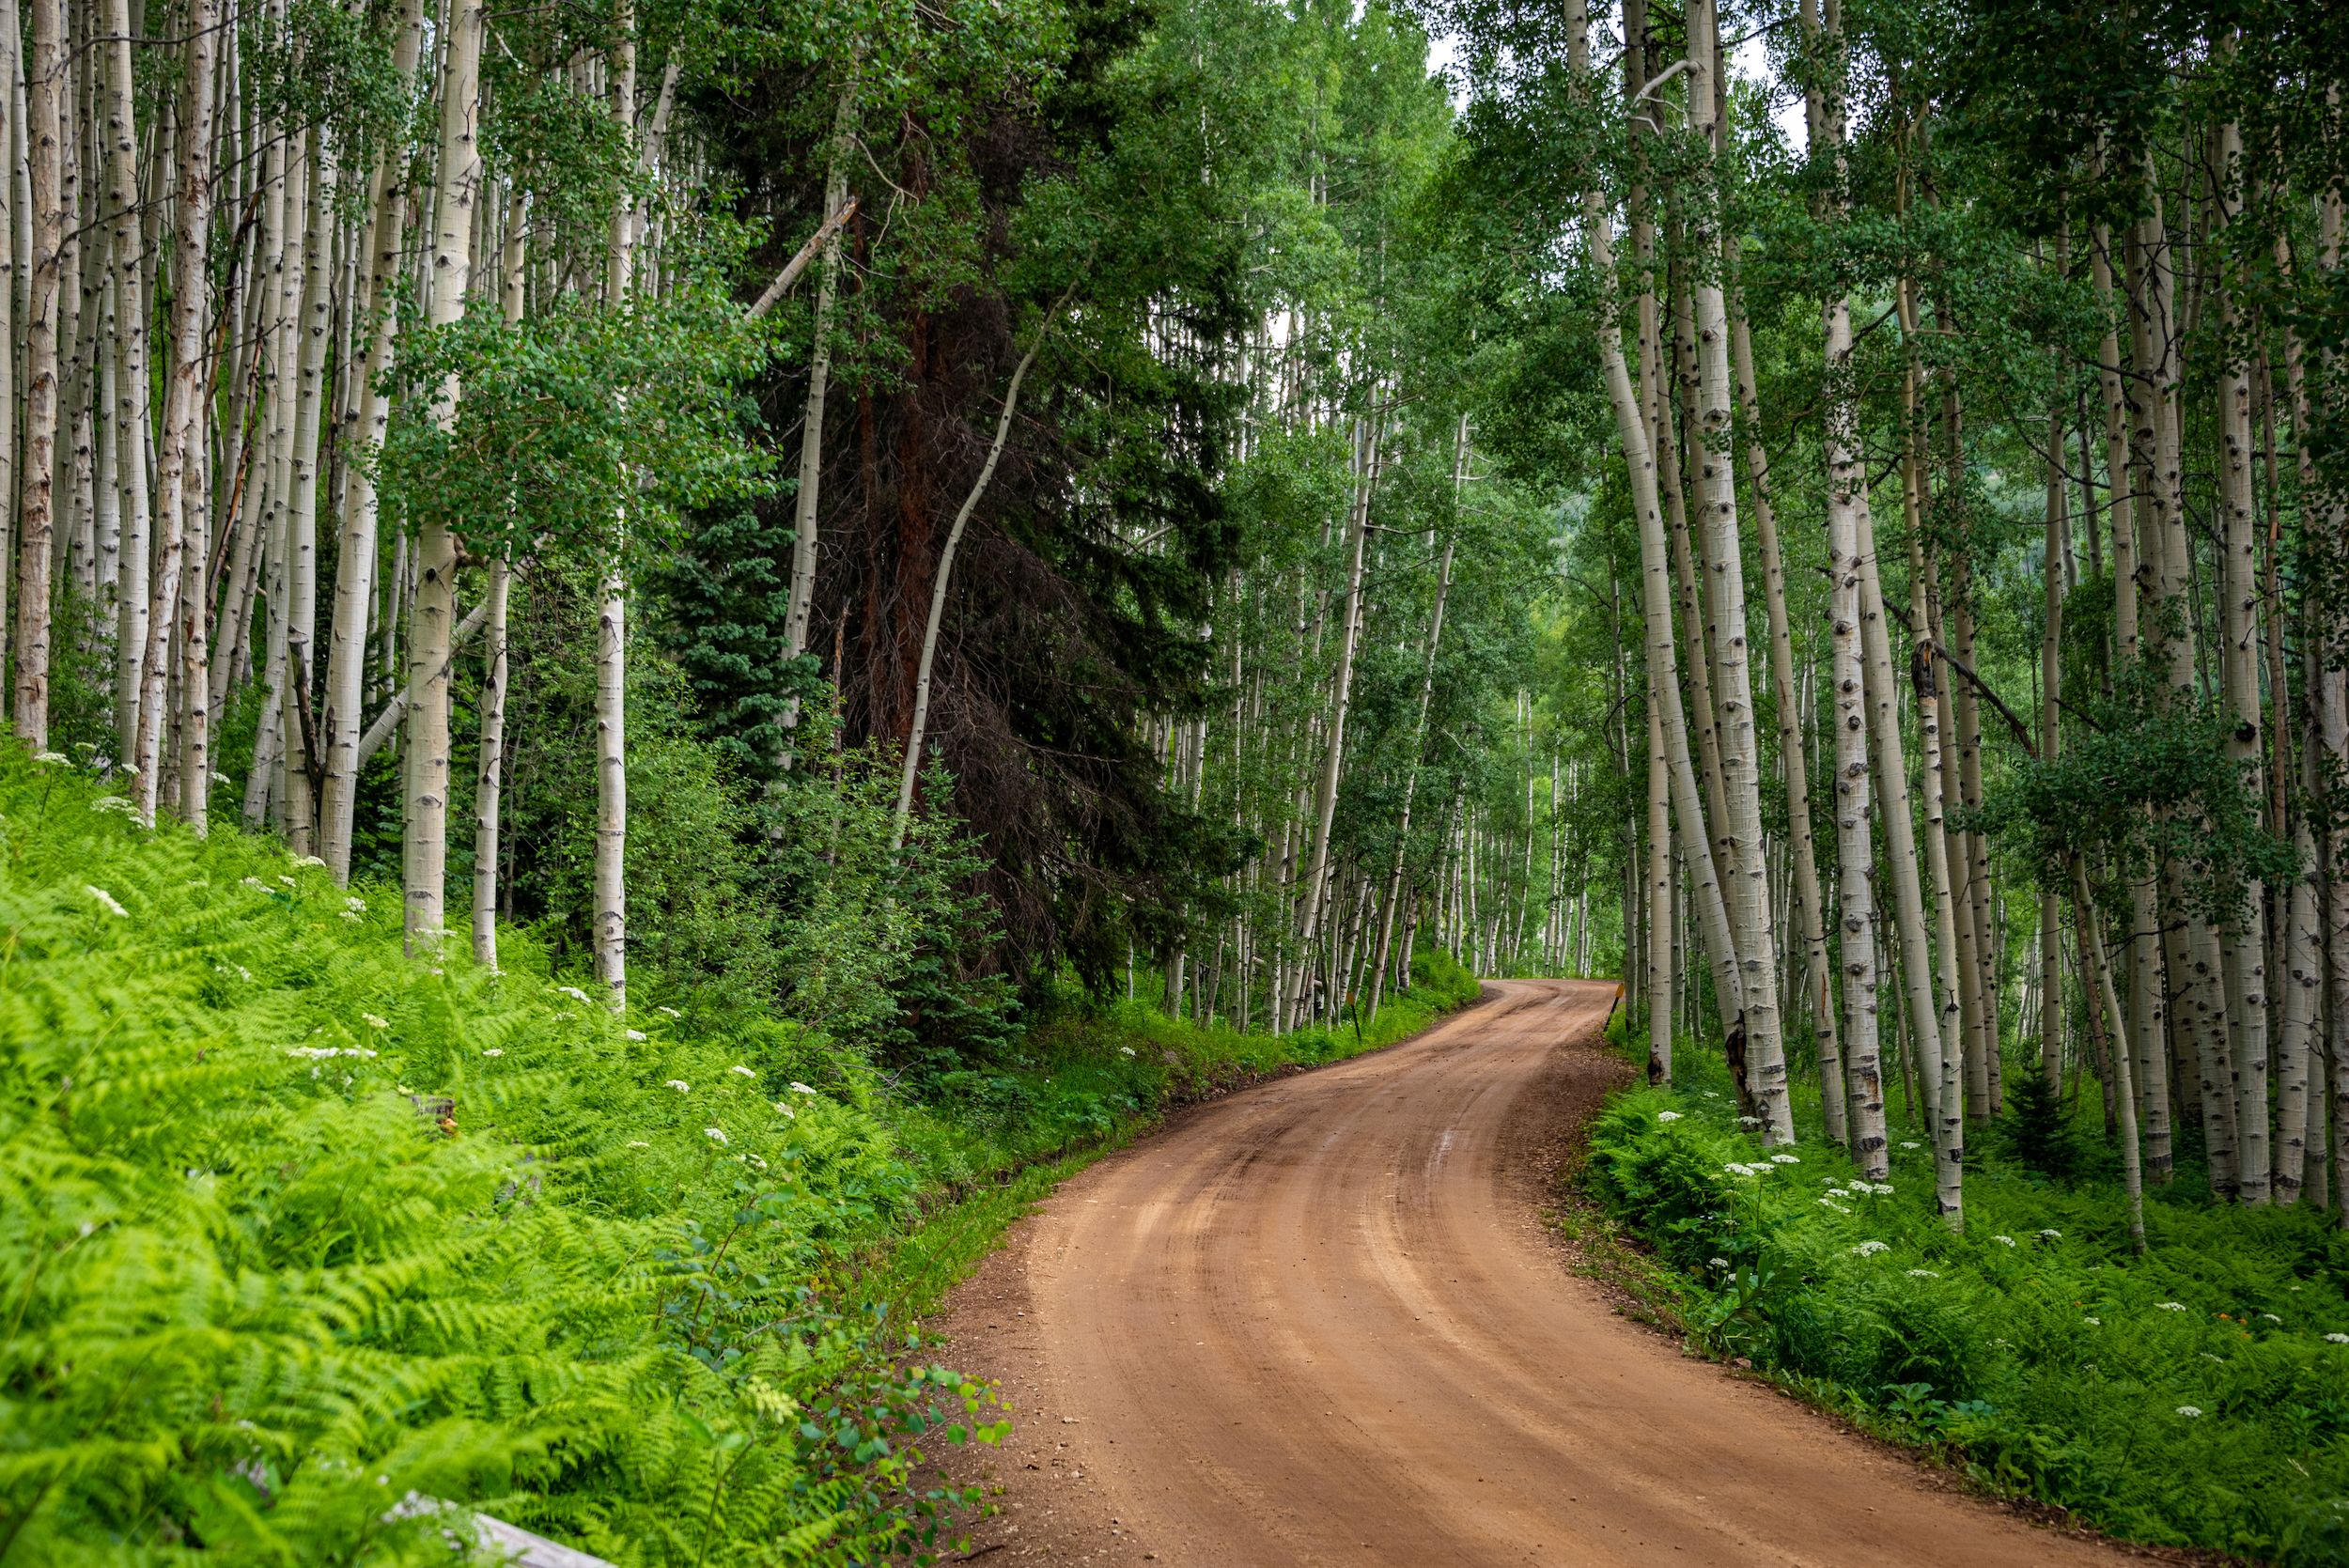 A dirt road winds through a grove of trees